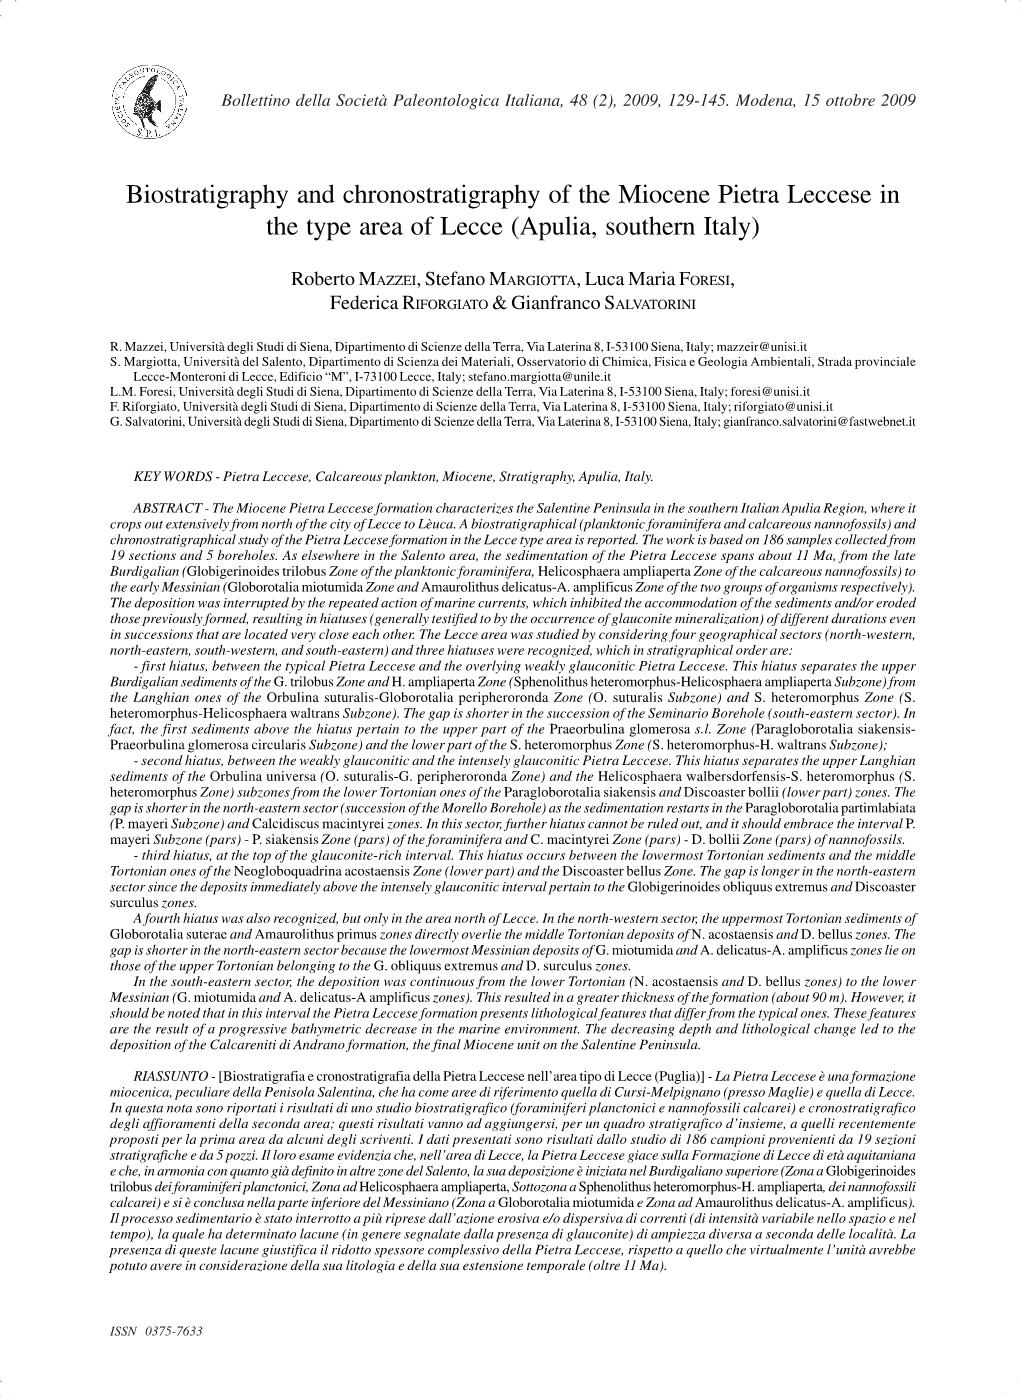 Biostratigraphy and Chronostratigraphy of the Miocene Pietra Leccese in the Type Area of Lecce (Apulia, Southern Italy)